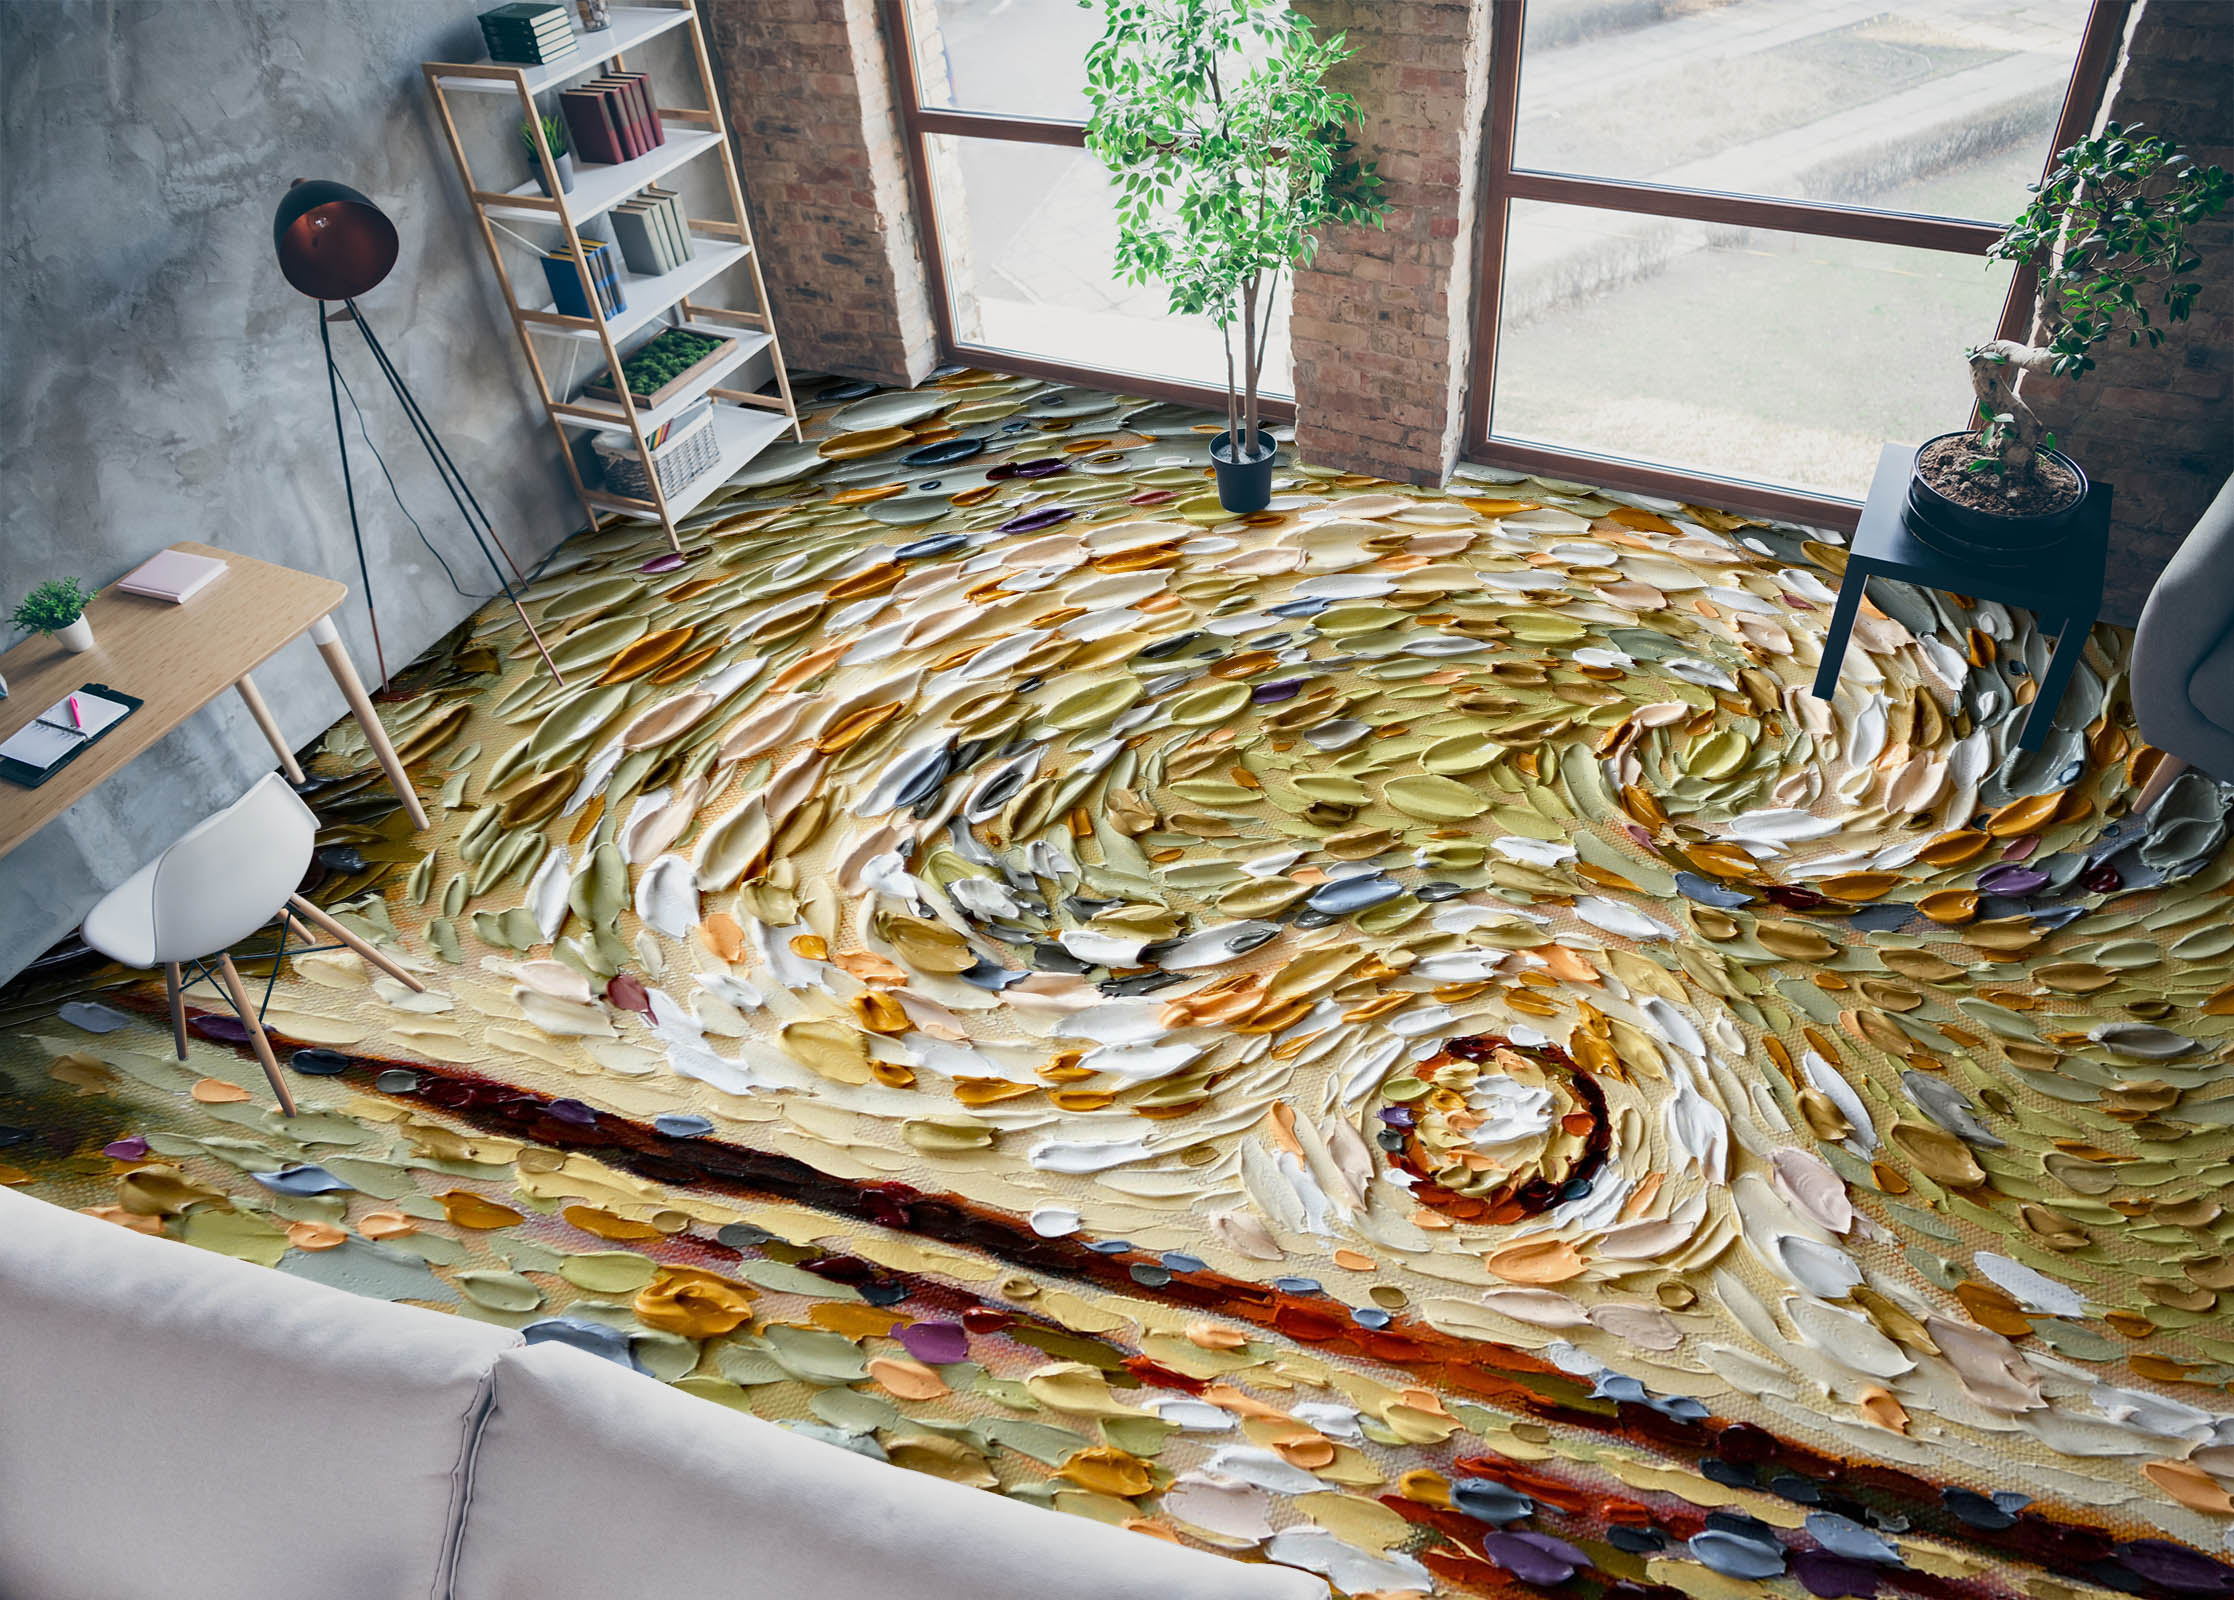 3D Like A Stone Oil Paint 567 Dena Tollefson Floor Mural  Wallpaper Murals Self-Adhesive Removable Print Epoxy